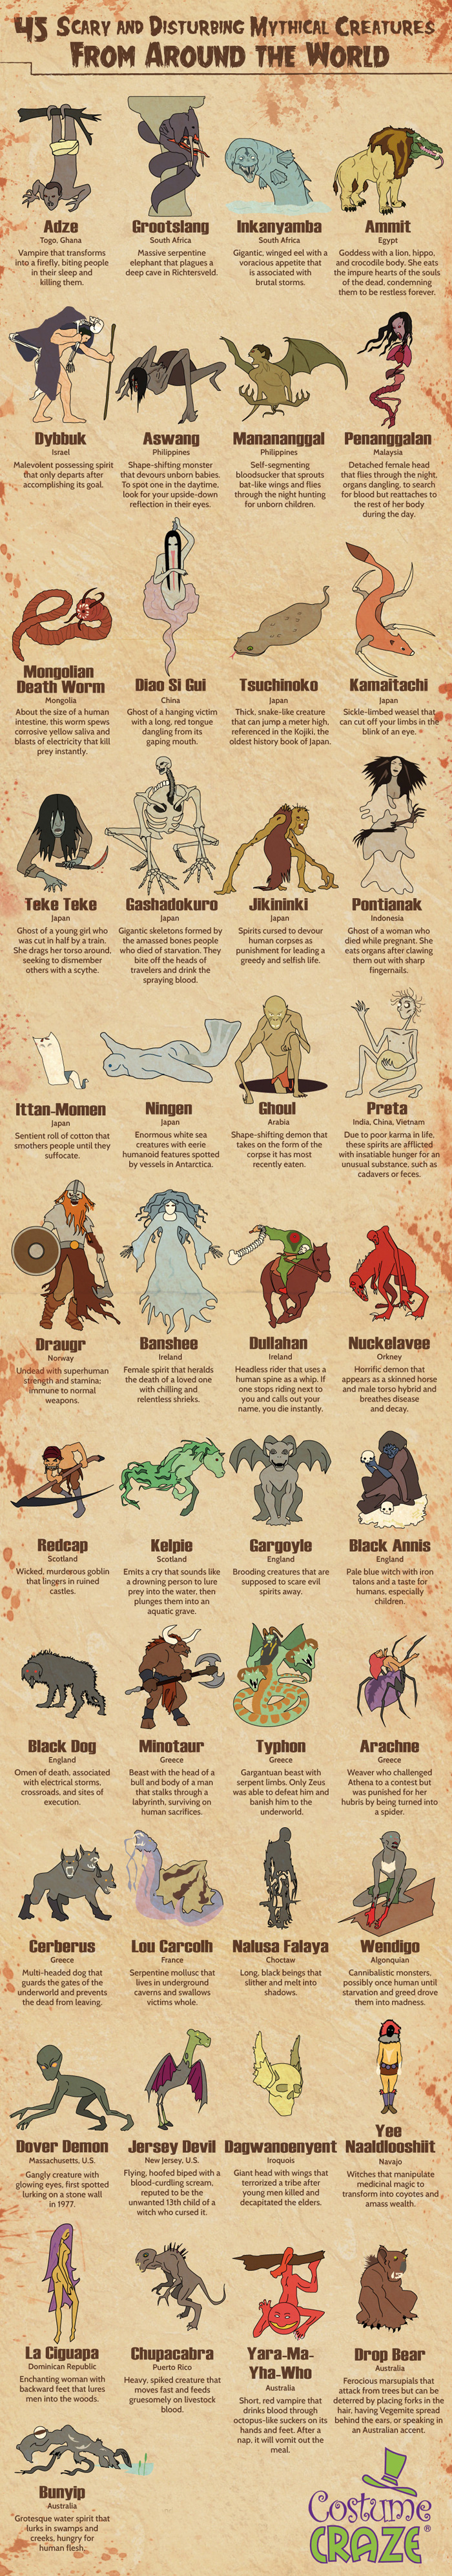 45 Scary and Disturbing Mythical Creatures From Around the World